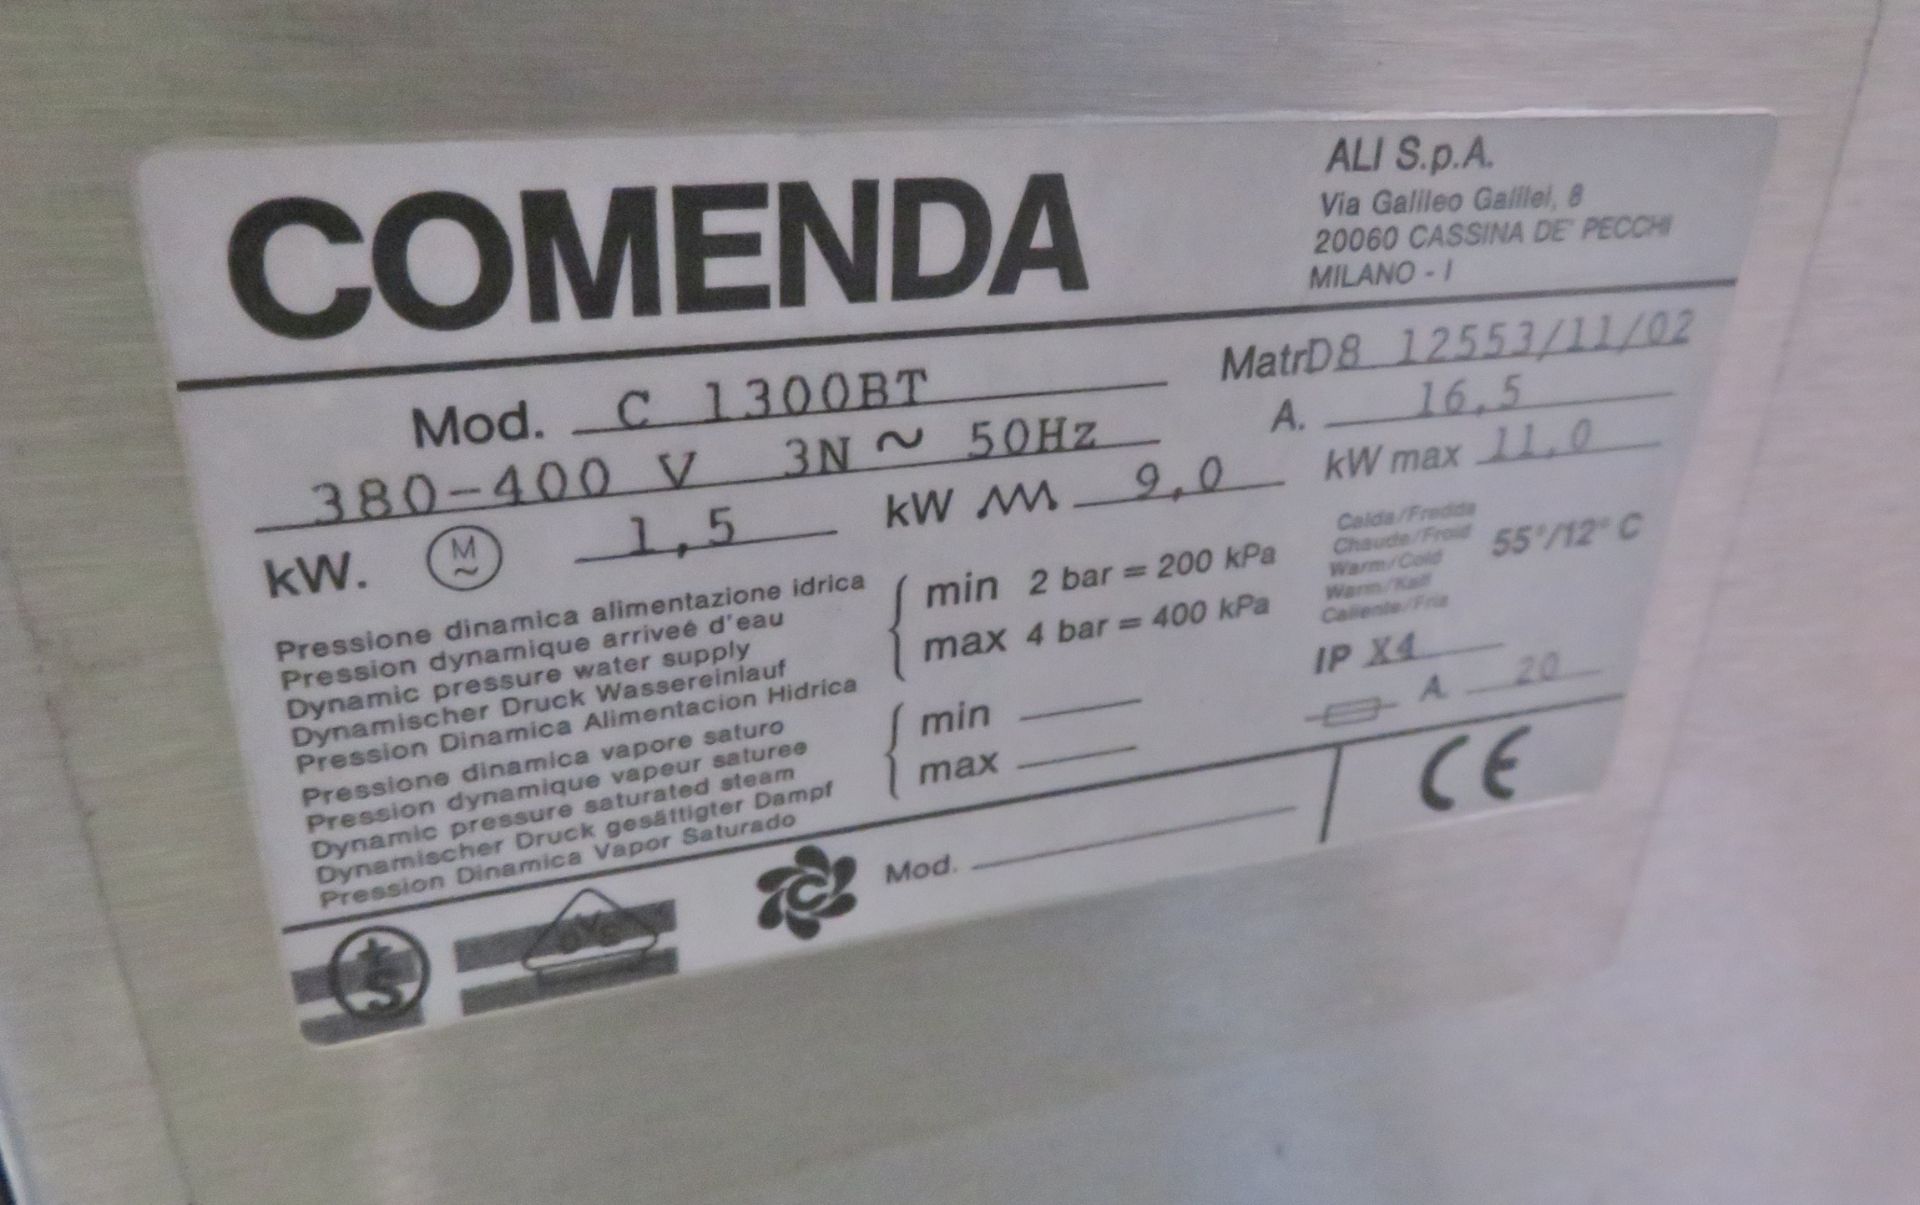 Comenda C 1300RT Dishwasher 380-400V with pre table & run off tabling - Image 5 of 5